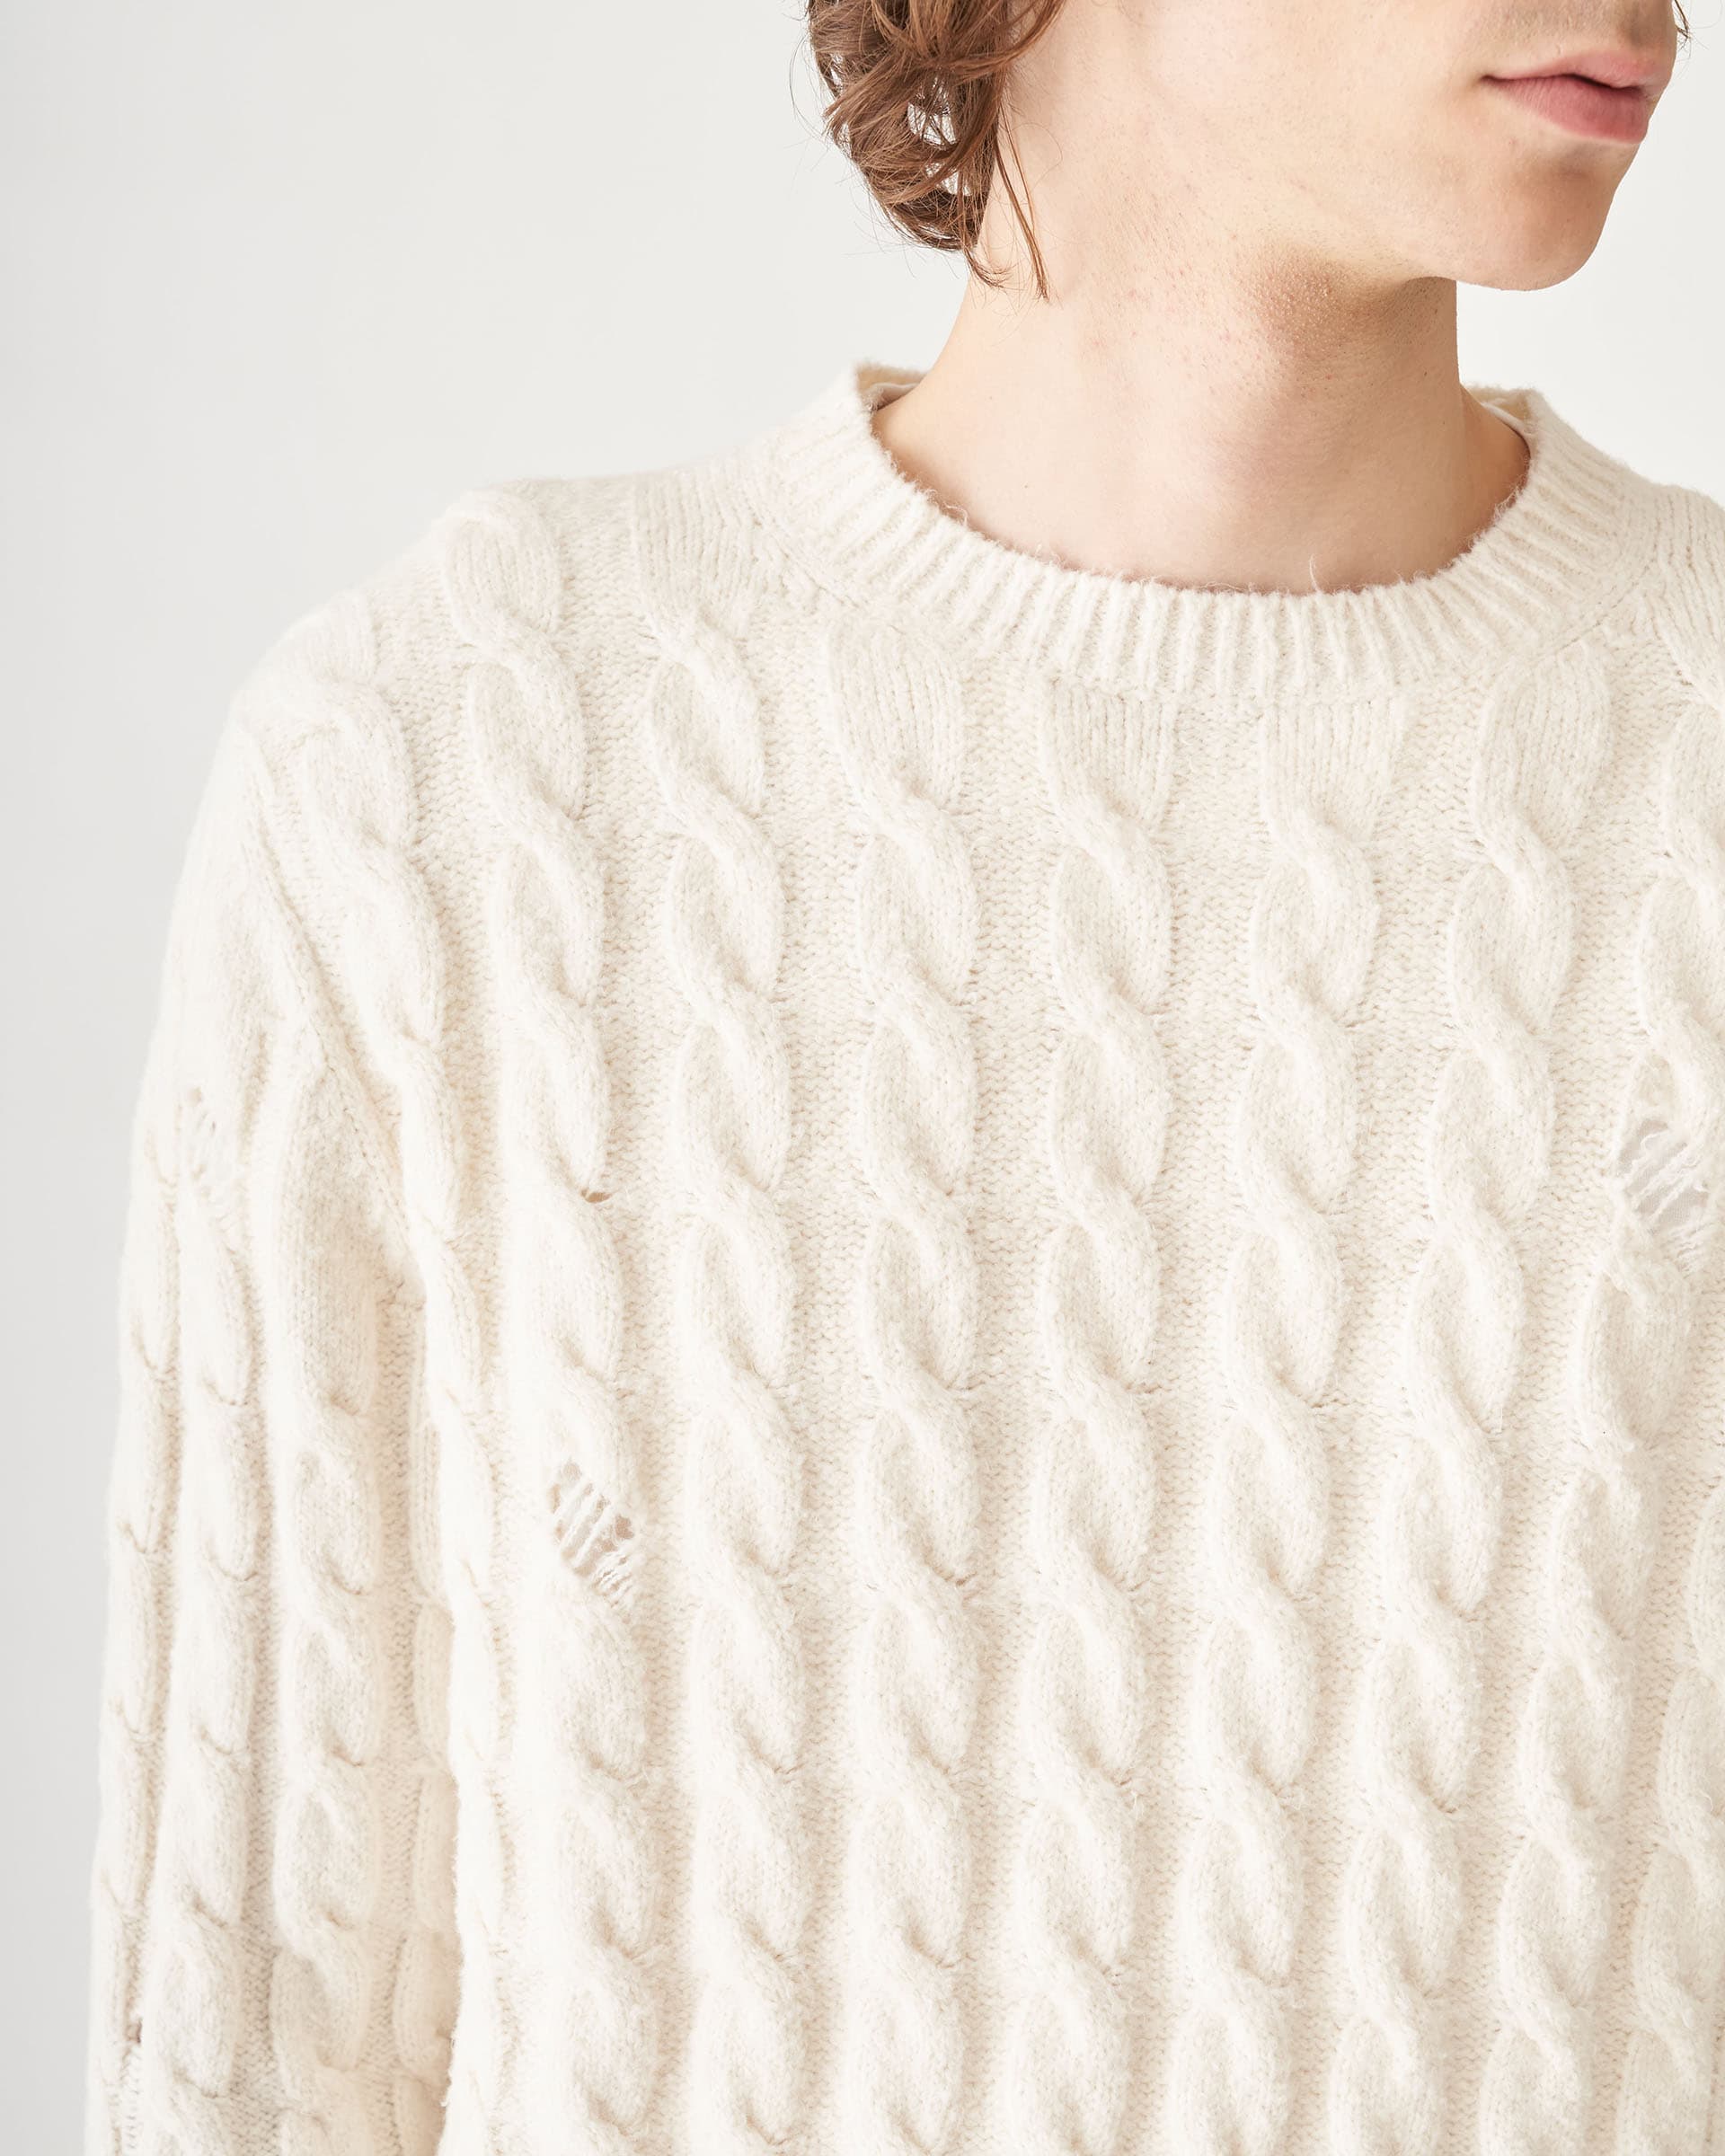 The Market Store | Crew Neck Sweater With Cables